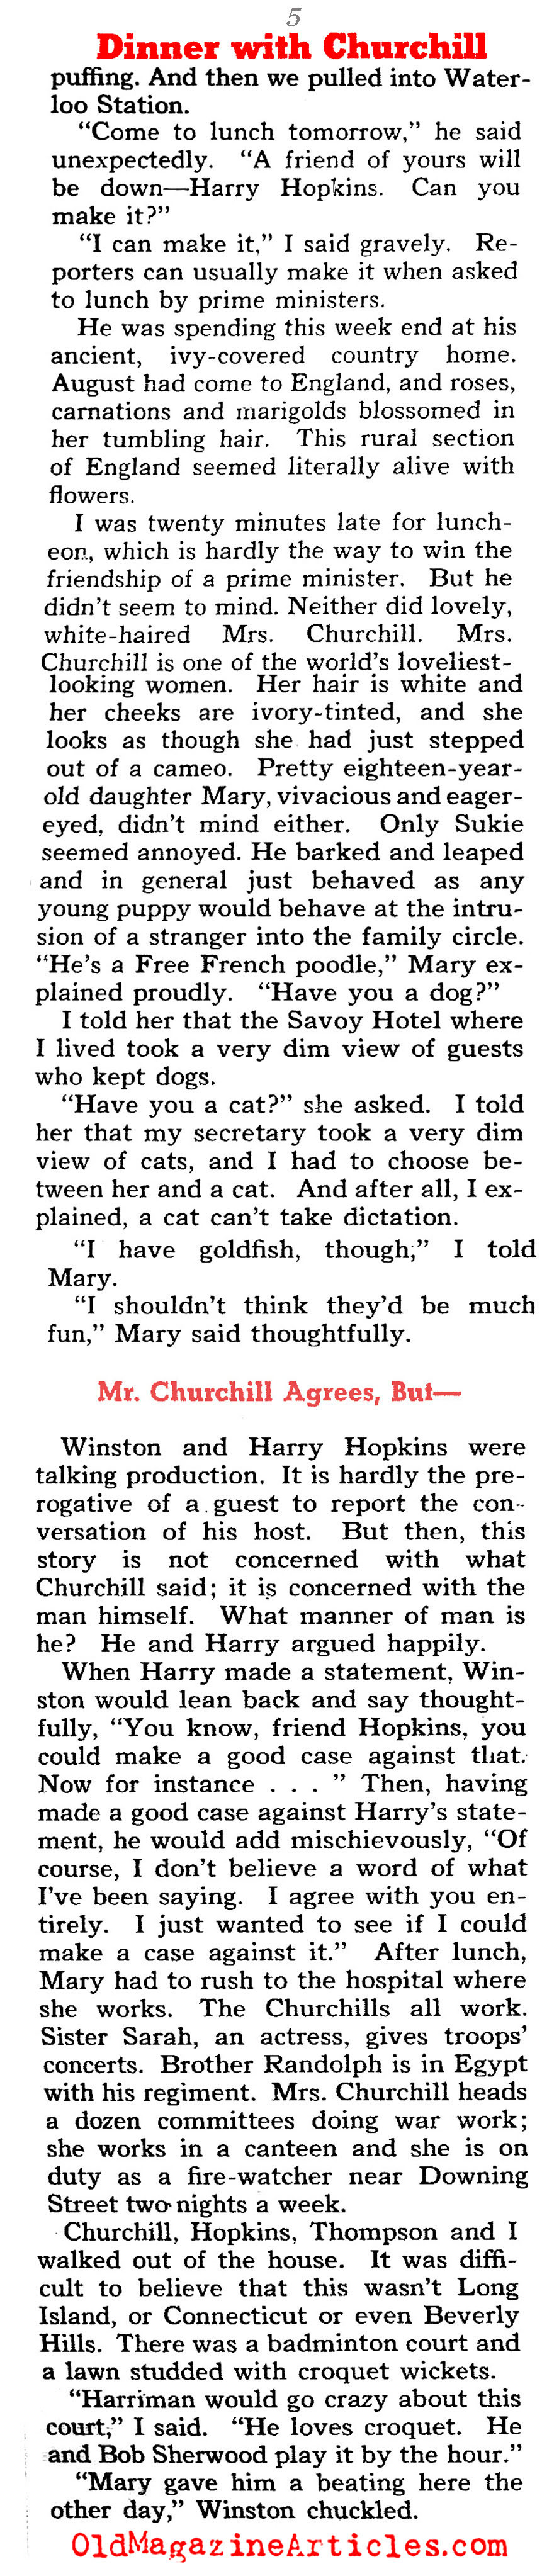 My Dinner With Winston (Collier's Magazine, 1941)